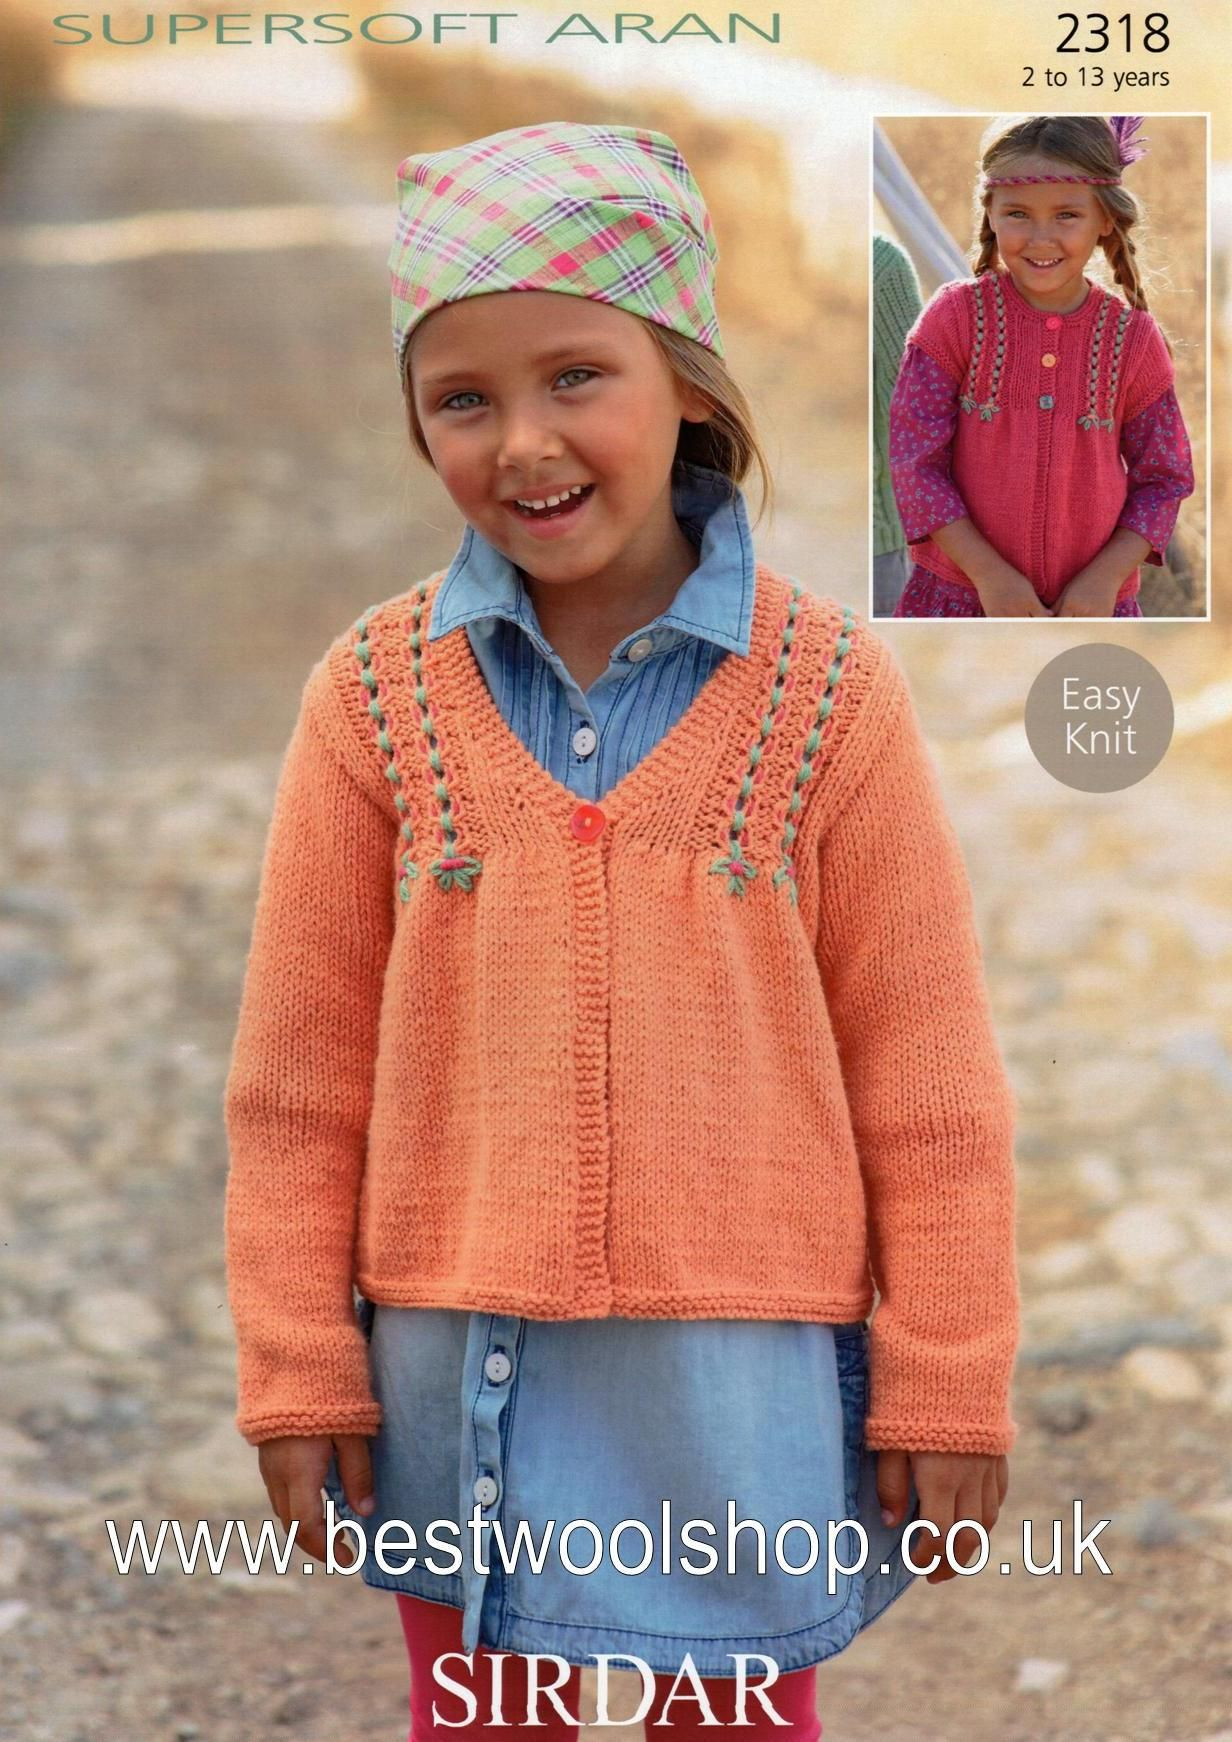 Easy Jumper Knitting Pattern 2318 Sirdar Supersoft Aran Easy Knit Long Short Sleeved Cardigan Knitting Pattern To Fit 2 To 13 Years